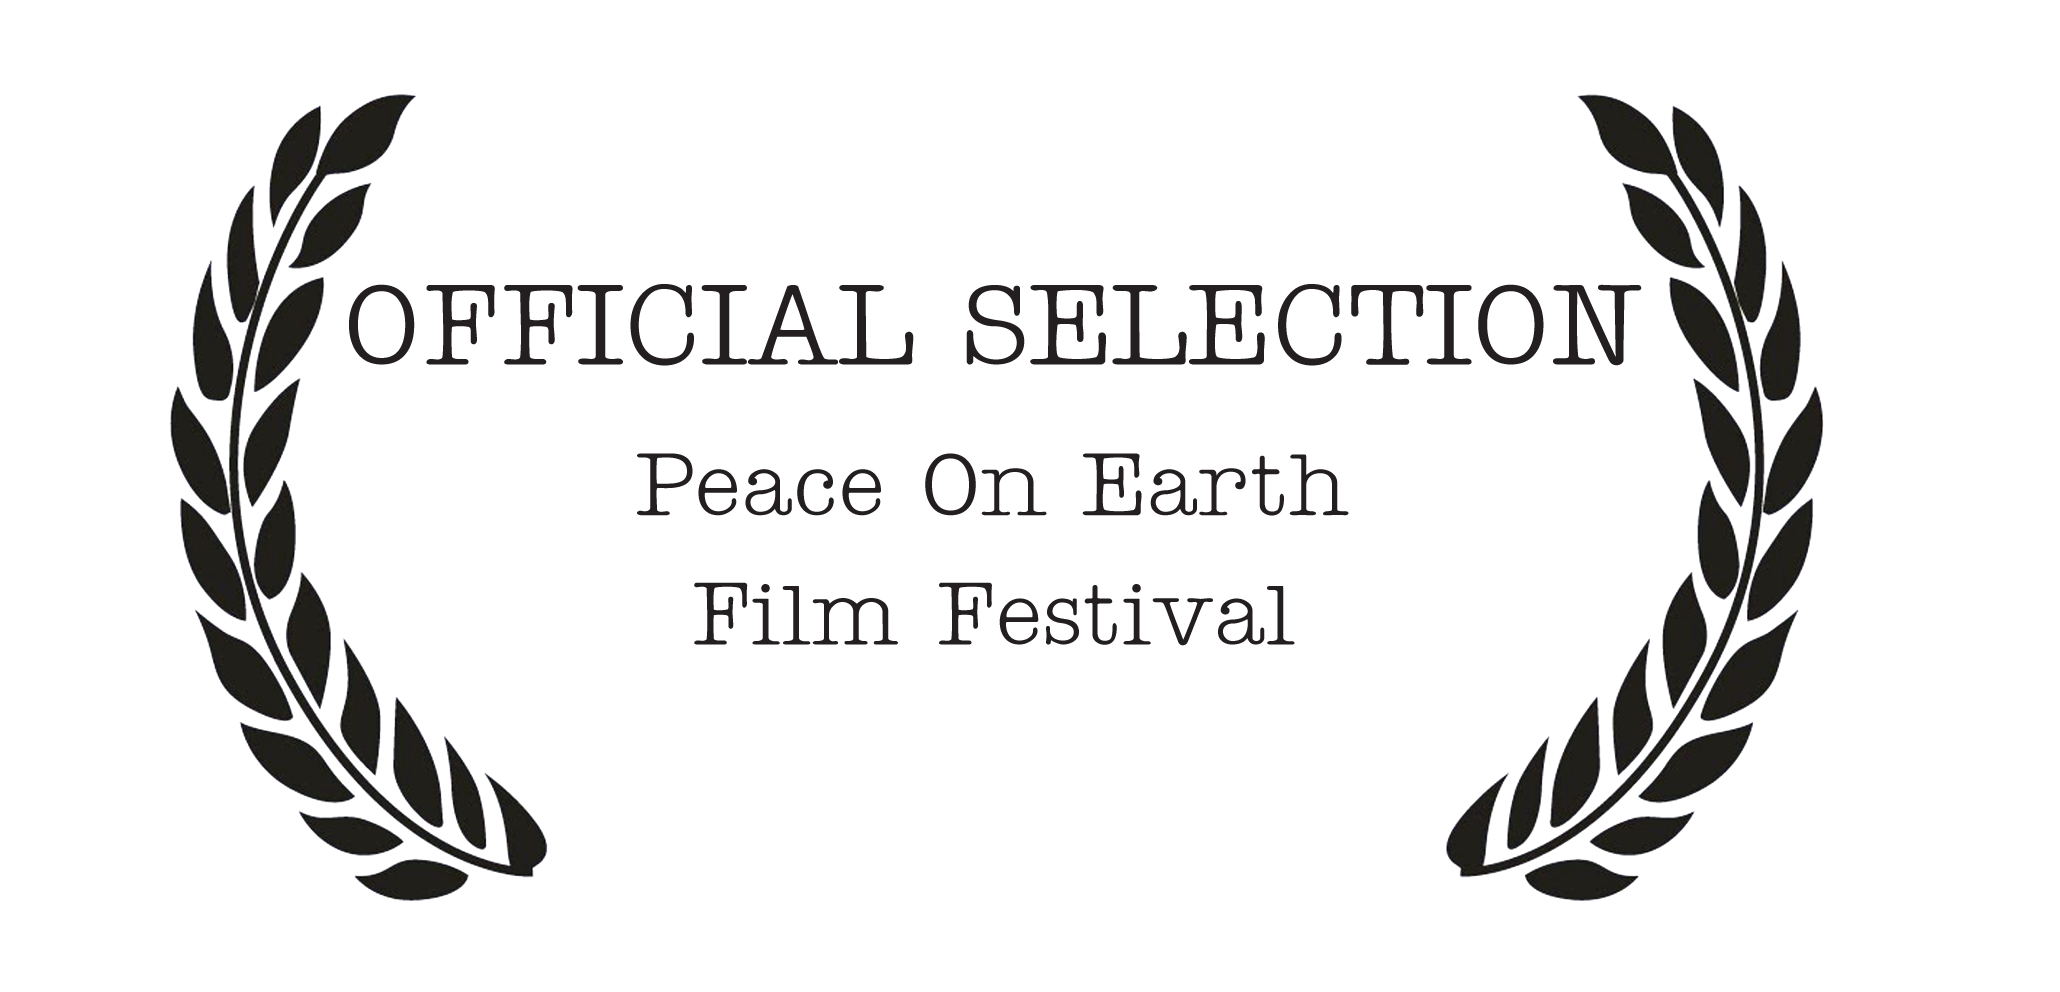 Elmira Case documentary film Peace on Earth Official Sellection, Restorative Justice History